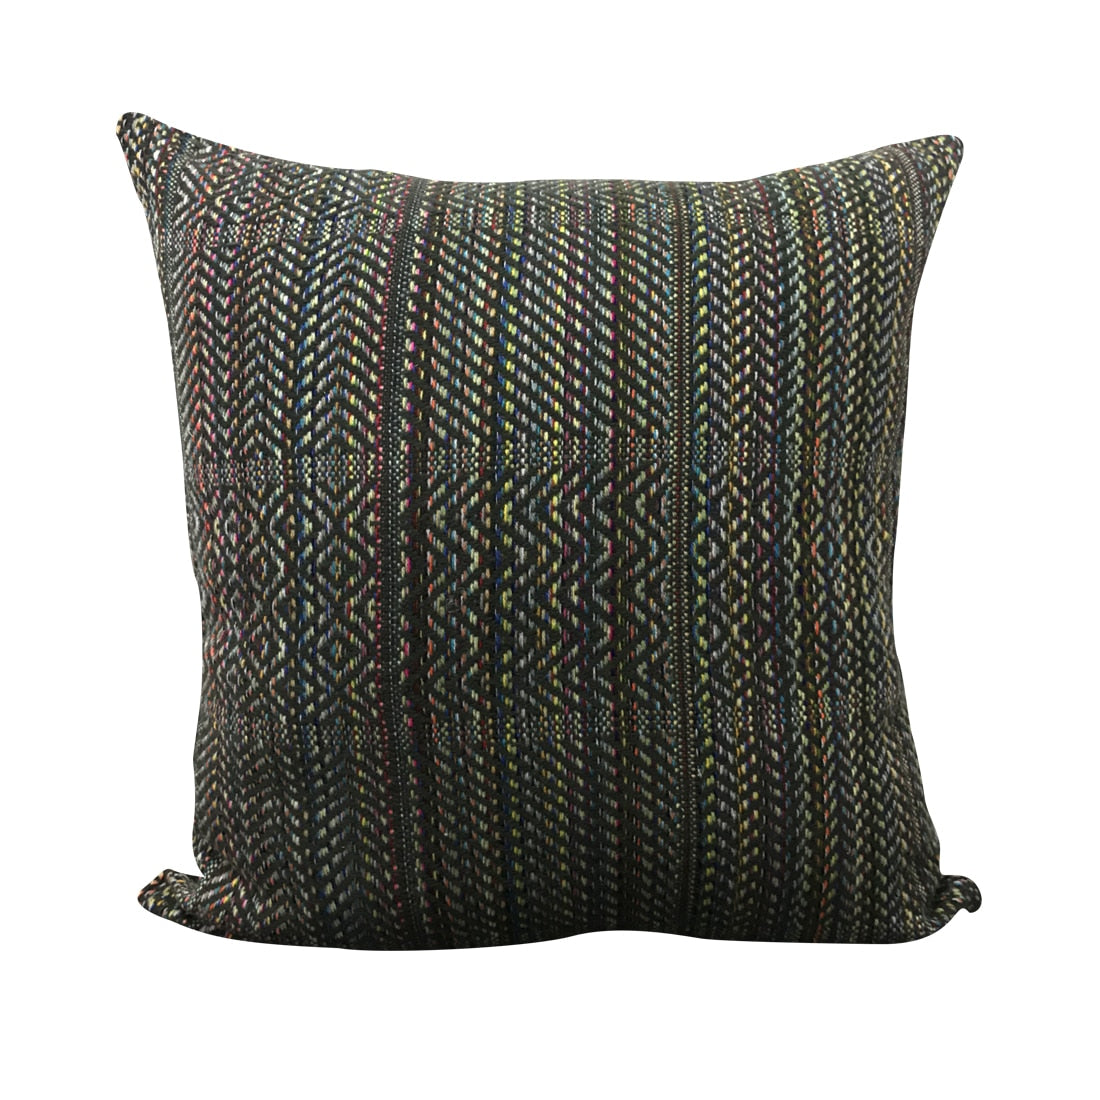 Abstract Hand Woven Cushion Covers 16x16